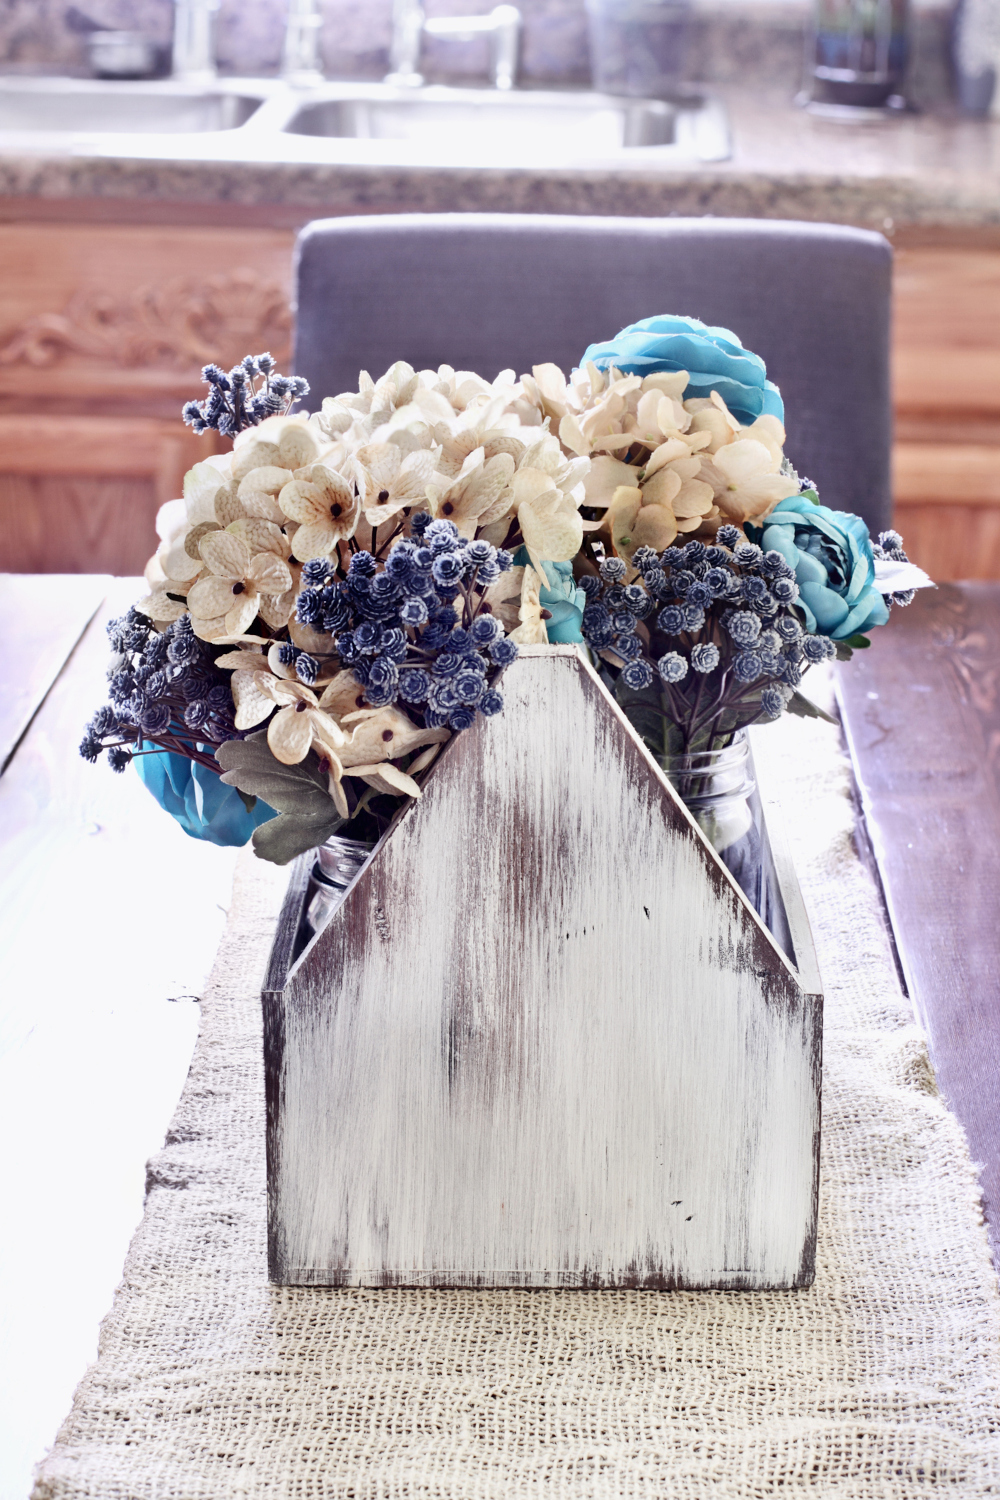 Antique Toolbox - Mason Jar Centerpieces with Flowers